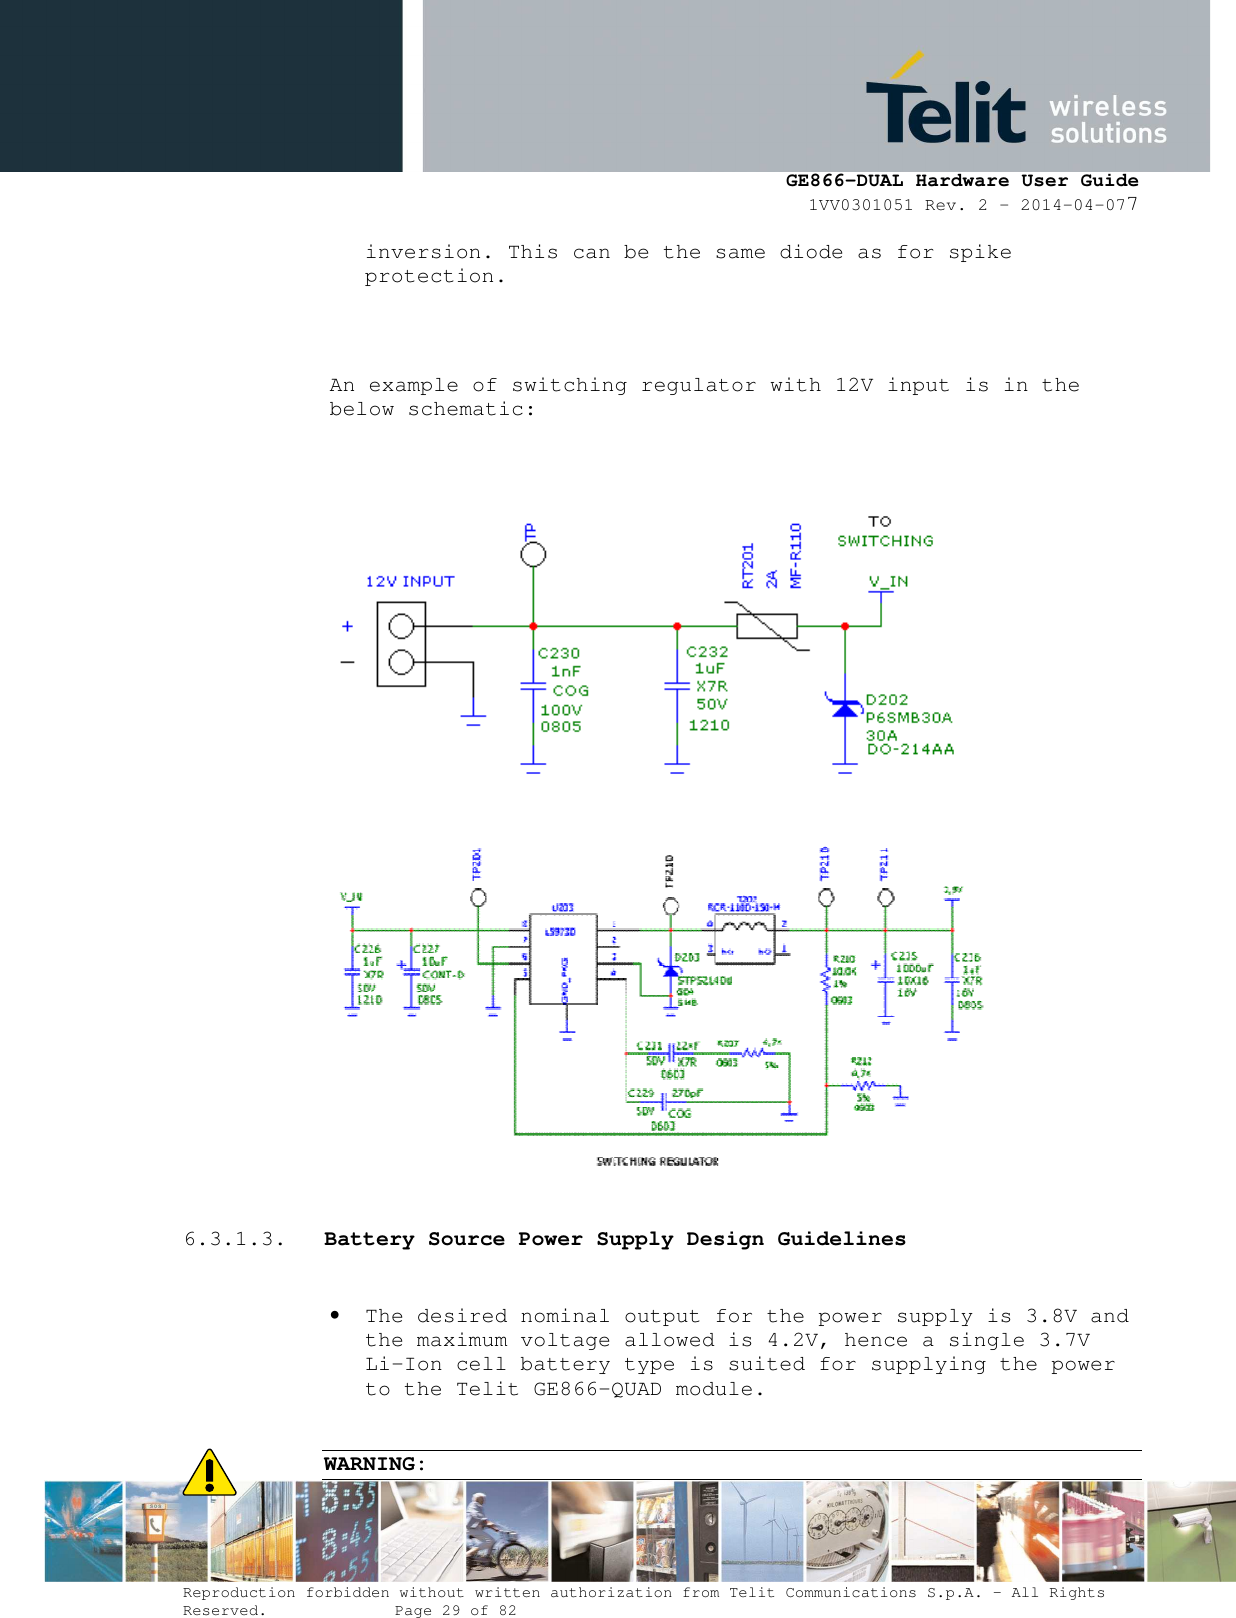      GE866-DUAL Hardware User Guide 1VV0301051 Rev. 2 – 2014-04-077  Reproduction forbidden without written authorization from Telit Communications S.p.A. - All Rights Reserved.    Page 29 of 82 Mod. 0805 2011-07 Rev.2 inversion. This can be the same diode as for spike protection.   An example of switching regulator with 12V input is in the below schematic:       6.3.1.3. Battery Source Power Supply Design Guidelines  • The desired nominal output for the power supply is 3.8V and the maximum voltage allowed is 4.2V, hence a single 3.7V Li-Ion cell battery type is suited for supplying the power to the Telit GE866-QUAD module.  WARNING: 